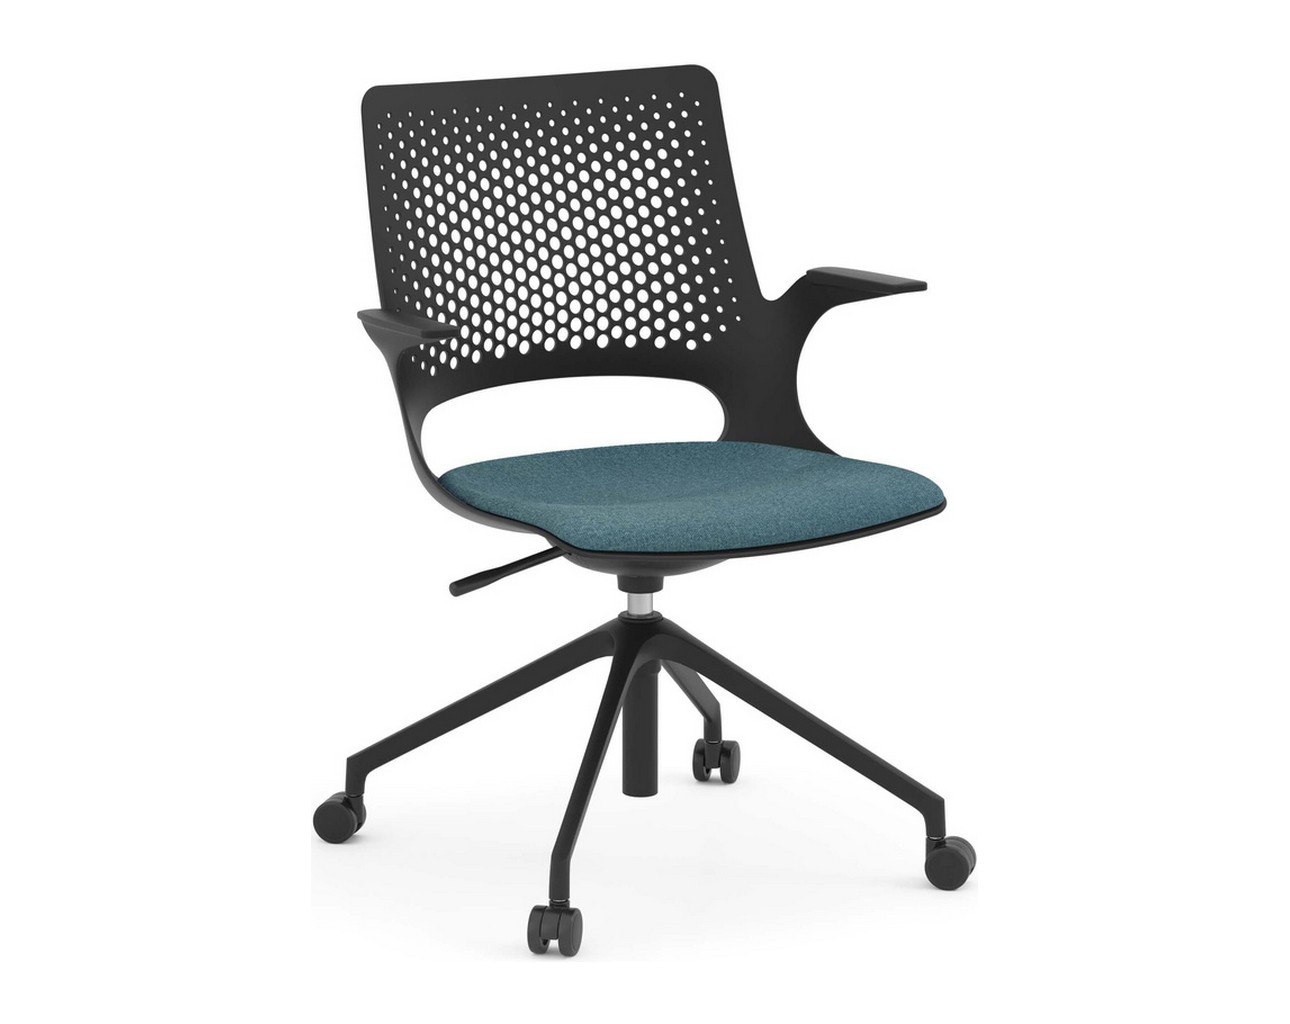 Harmony Multi-Purpose Chair – Black Base and Frame with Teal Seat